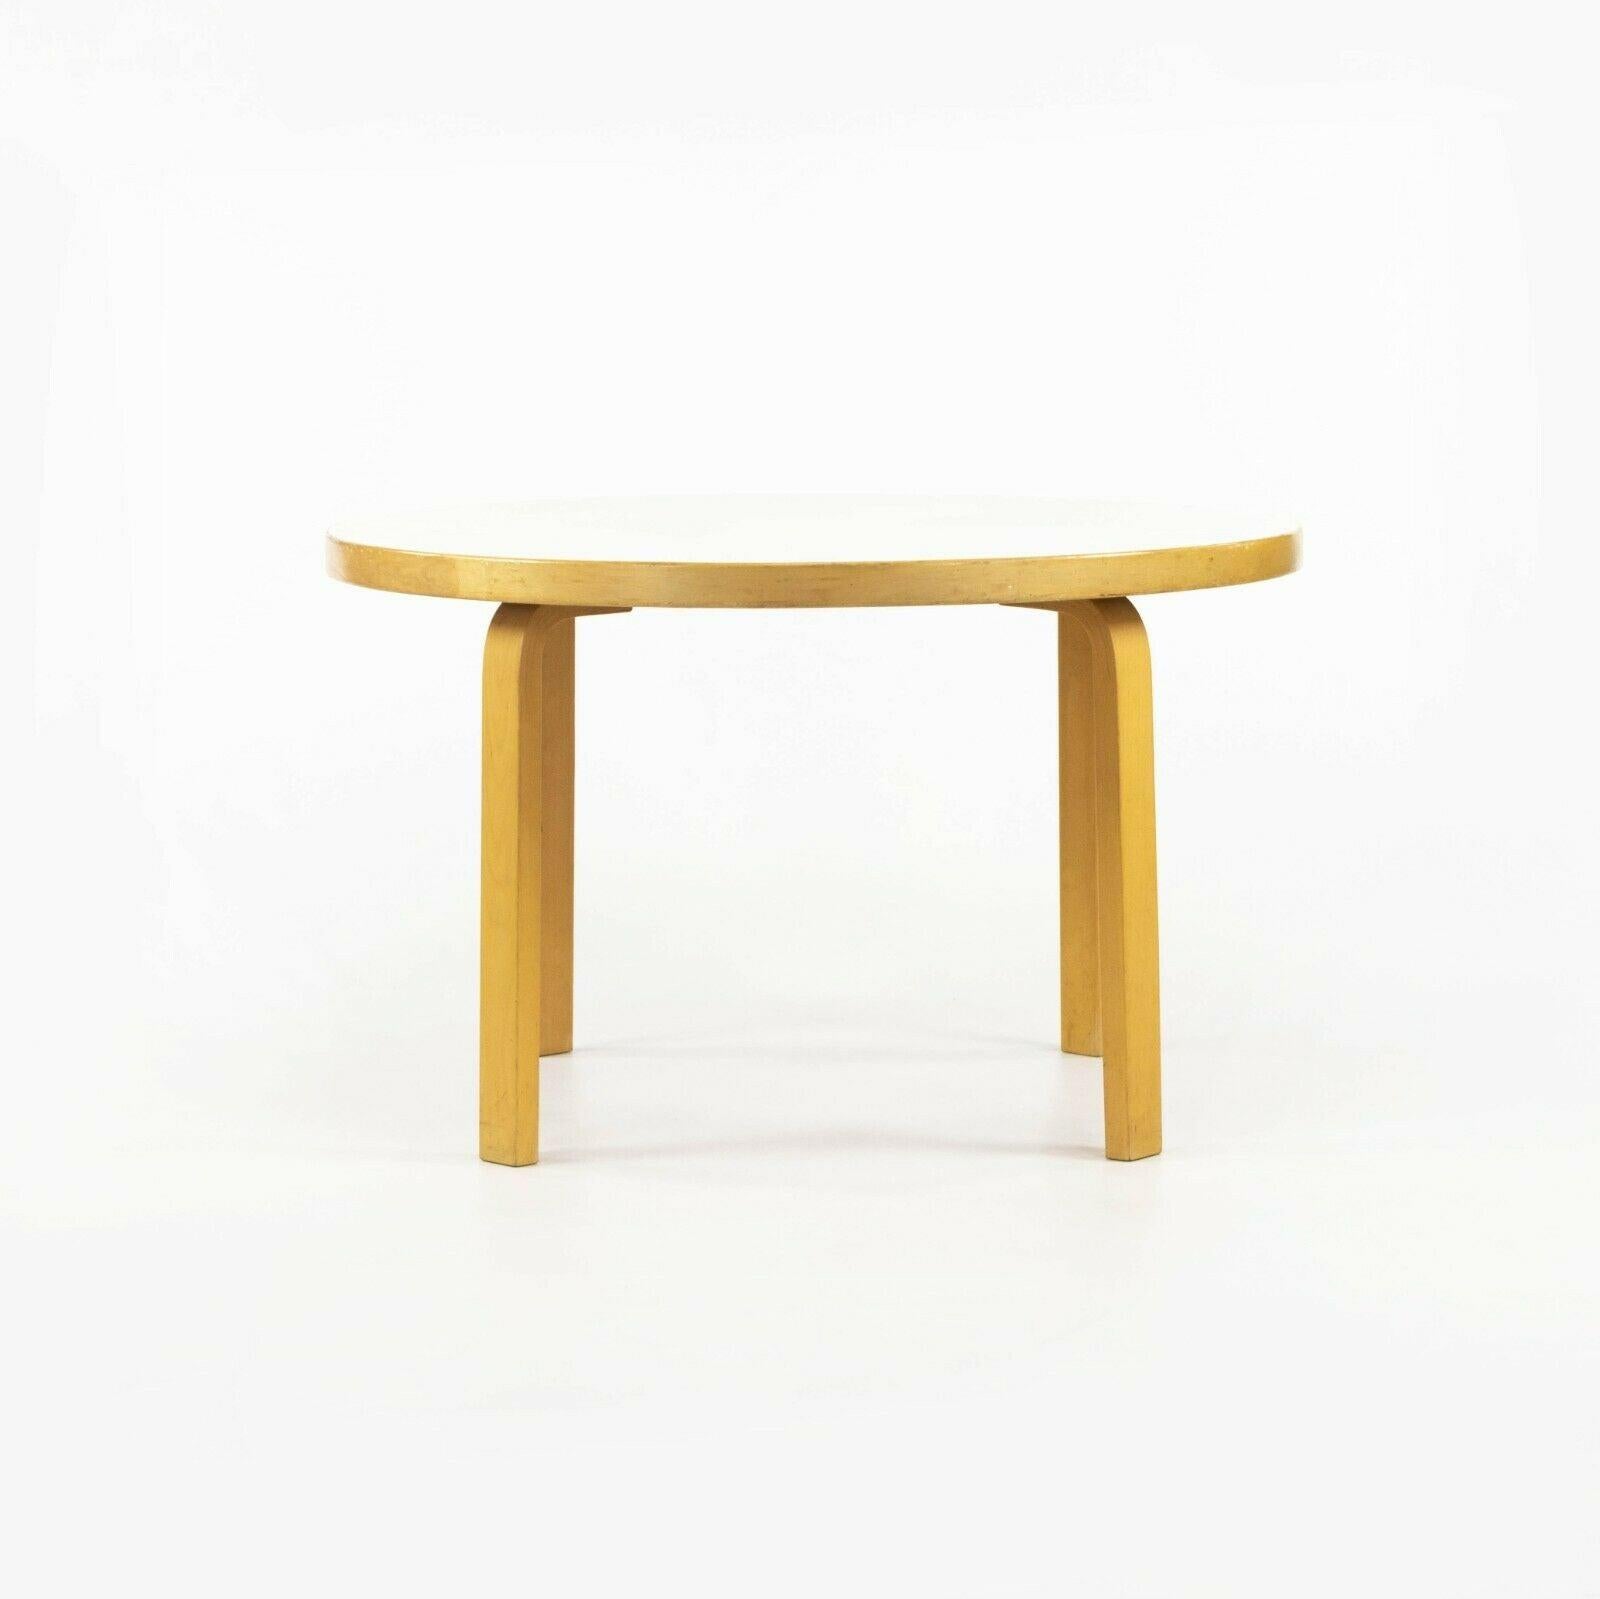 Listed for sale is a rare L-Leg Children's table, designed by Aino and Alvar Aalto, produced by Artek. The table retains an original label from Scandinavian Designs in New York, a showroom that was well known for selling sought after Scandinavian